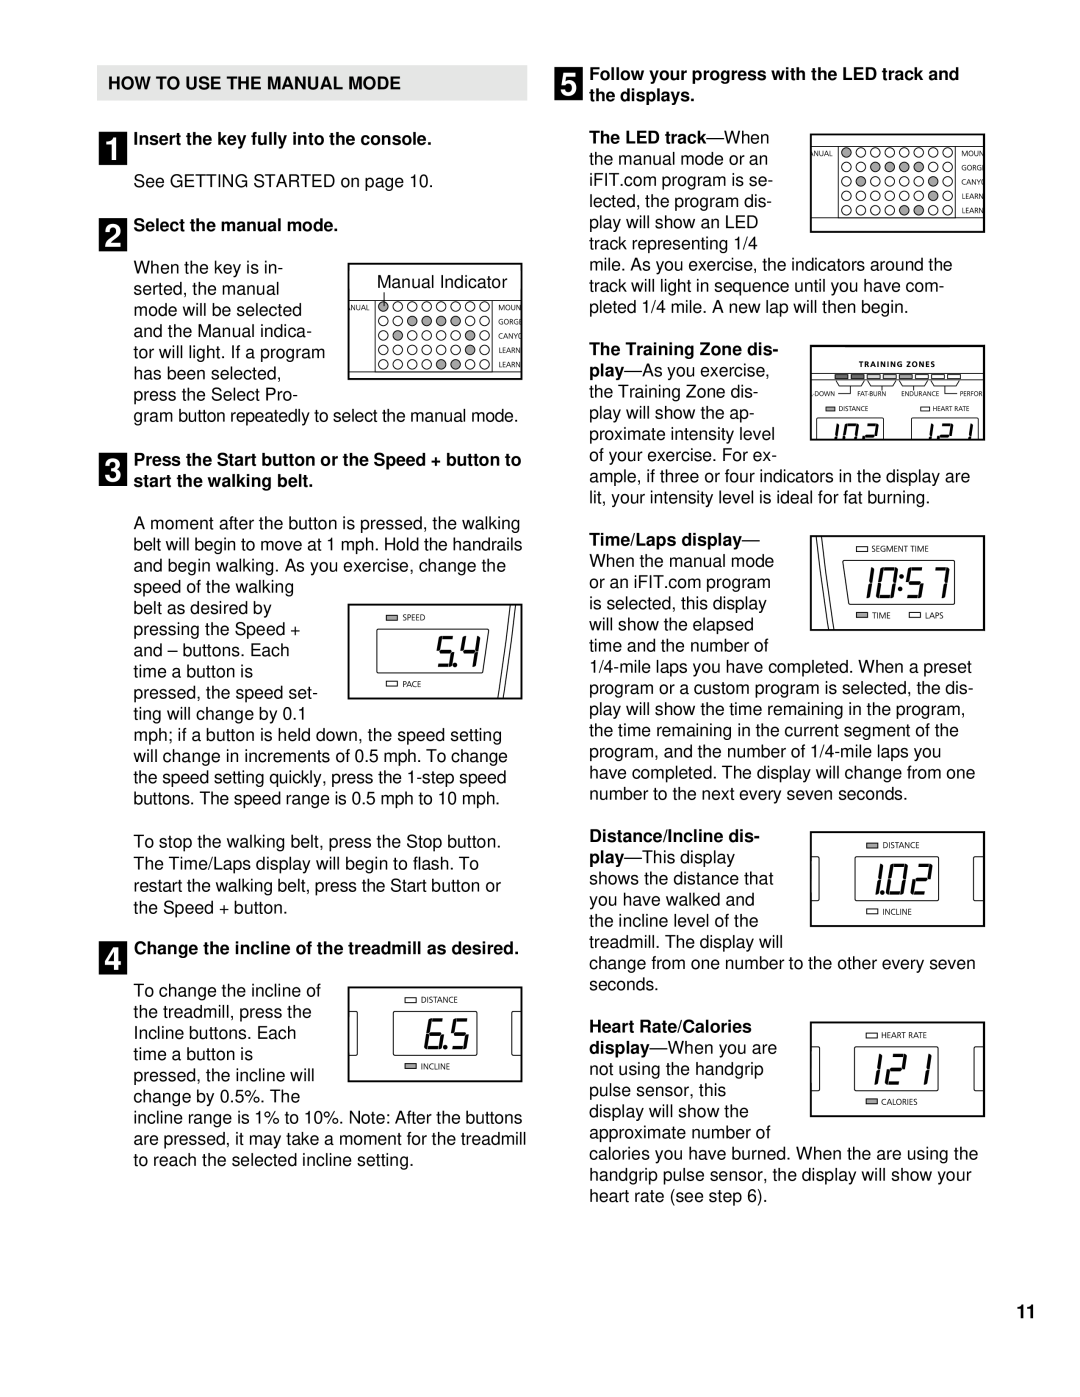 NordicTrack NTTL09994 HOW TO USE THE MANUAL MODE 1 Insert the key fully into the console, Select the manual mode 